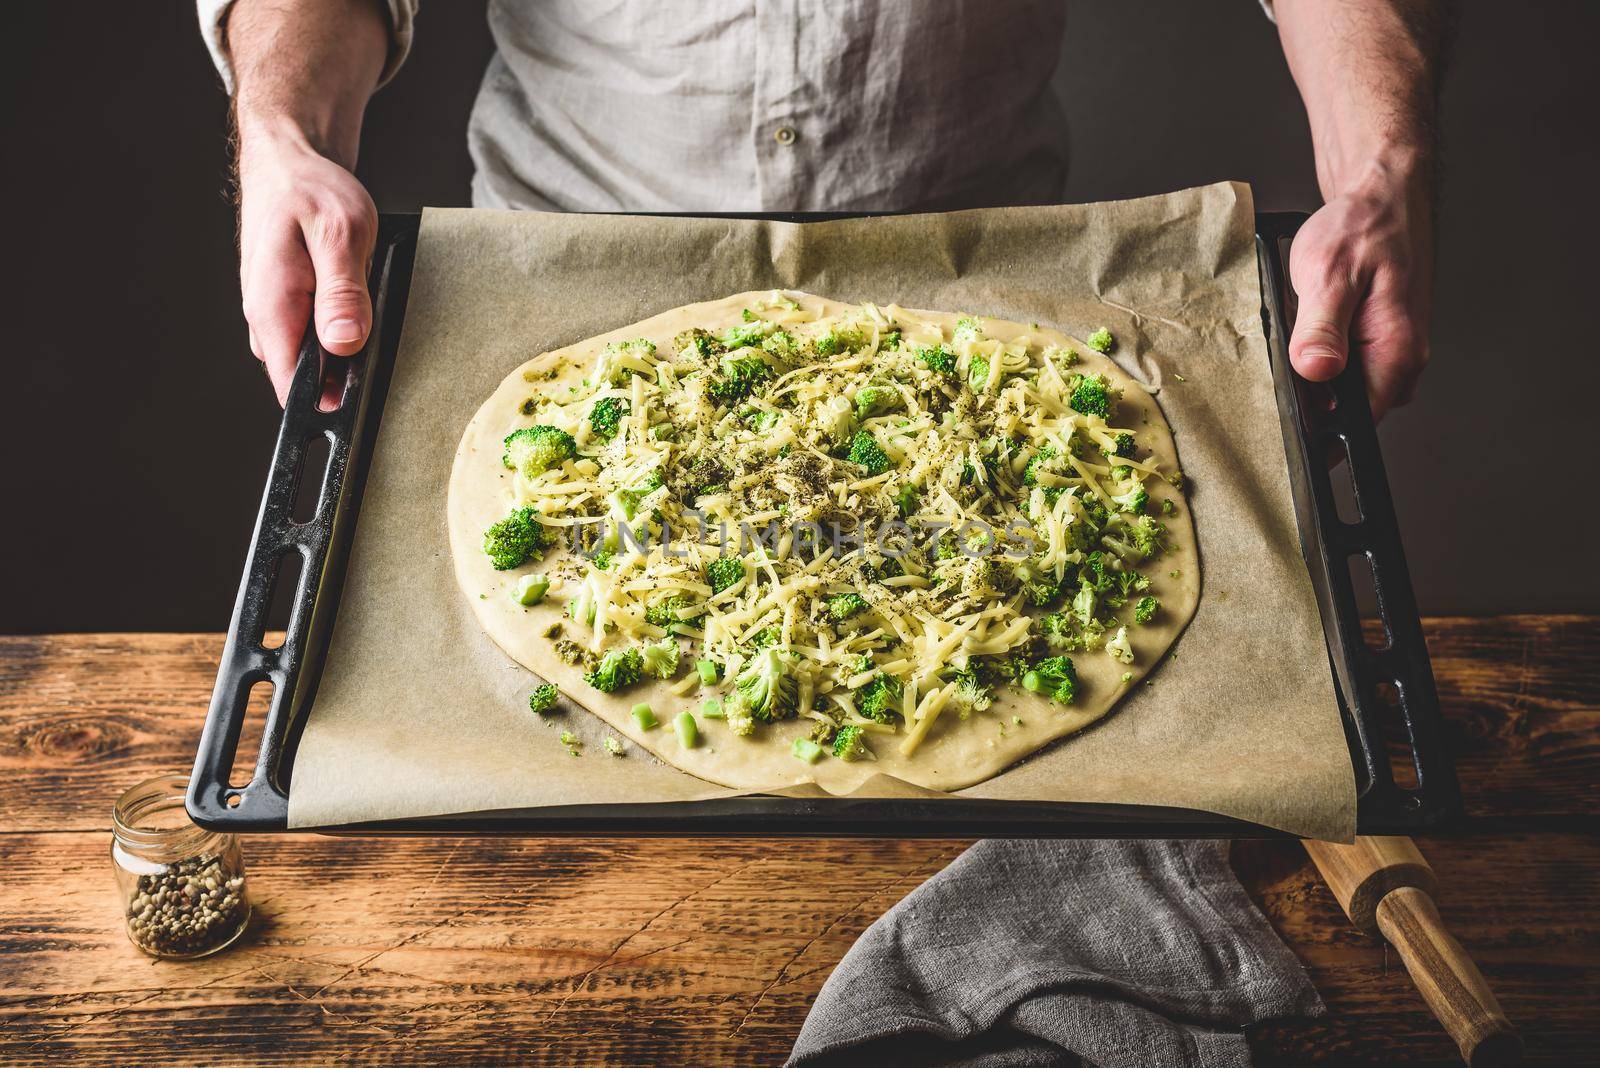 Man holding uncooked pizza with broccoli and cheese by Seva_blsv